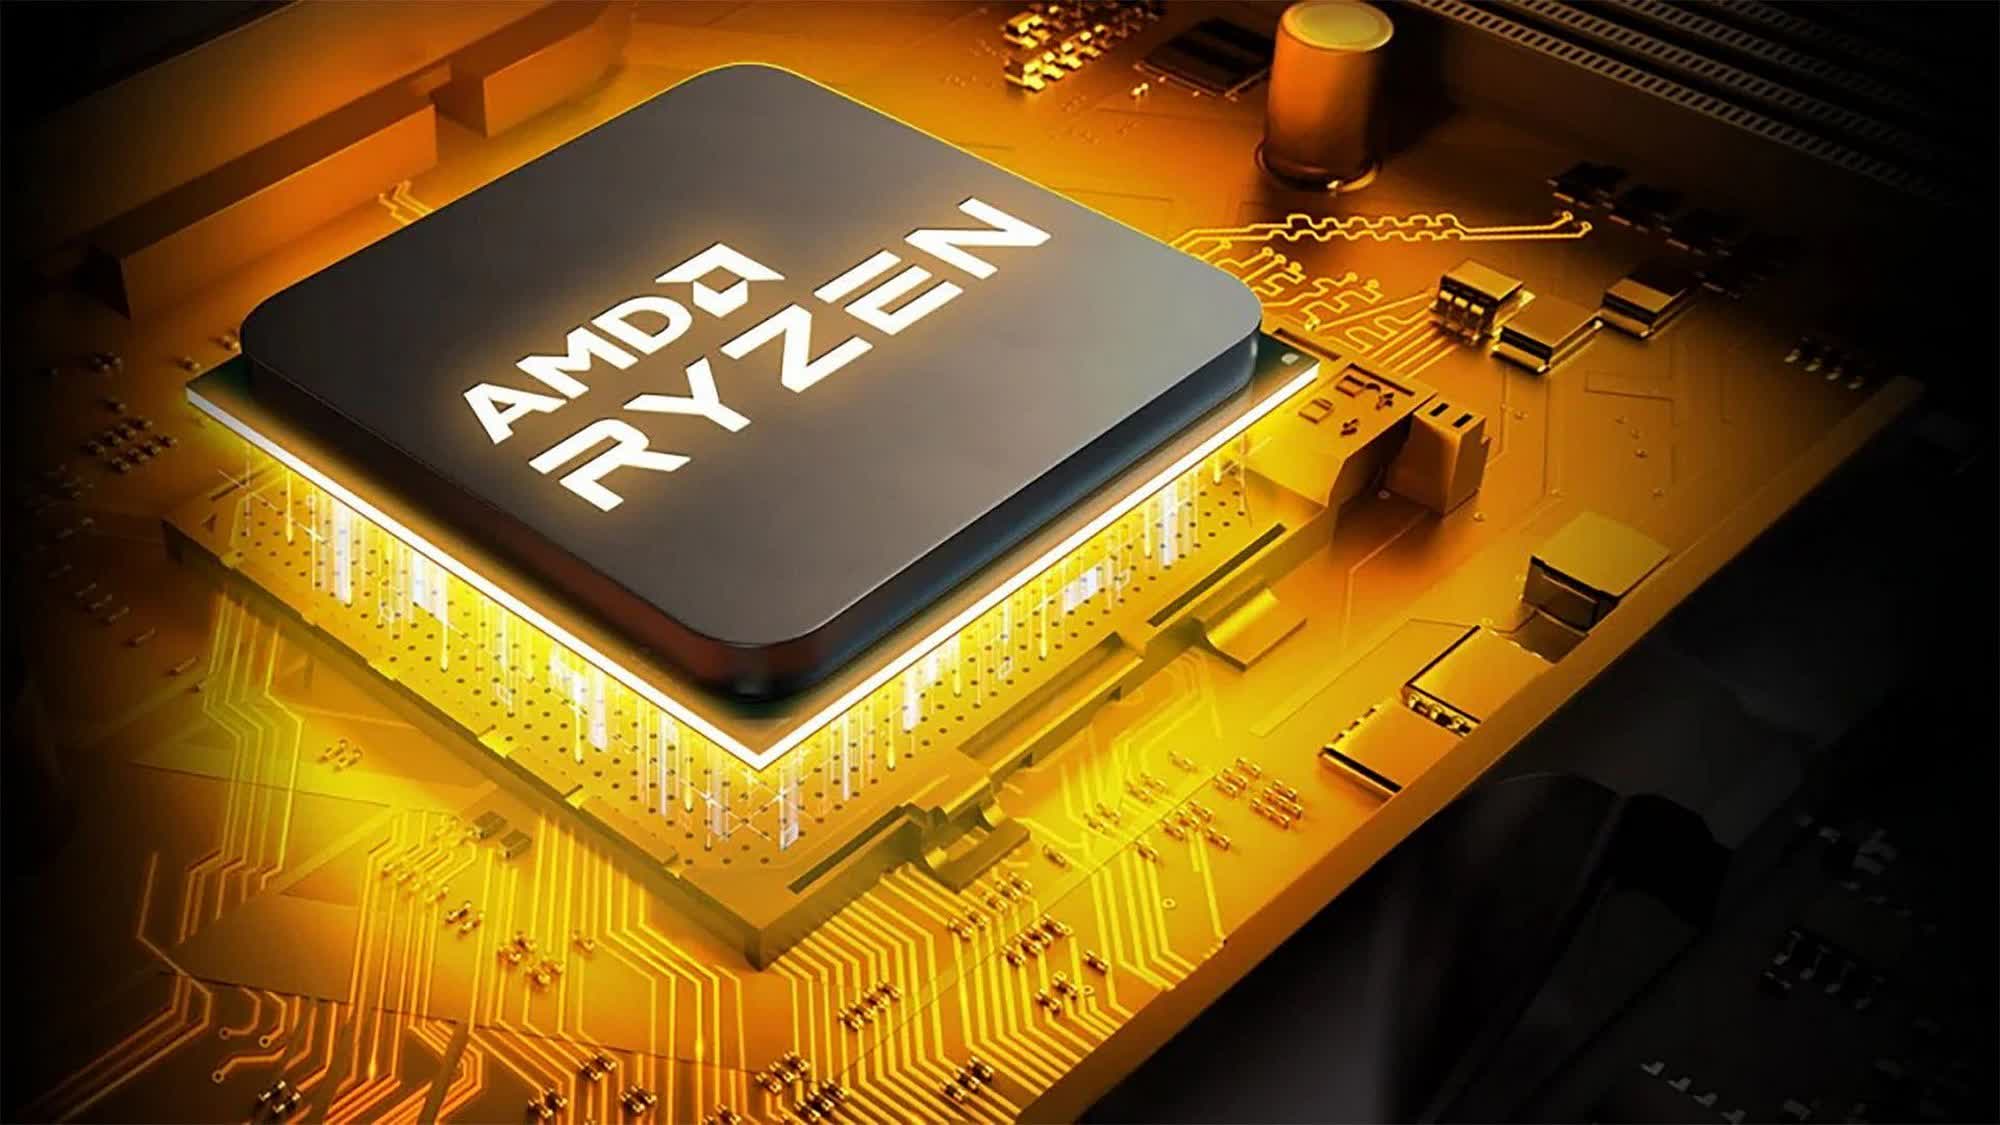 Massive leak reveals AMD's 'Strix Point' APUs with 16 CPU cores and 3 GHz+ iGPU